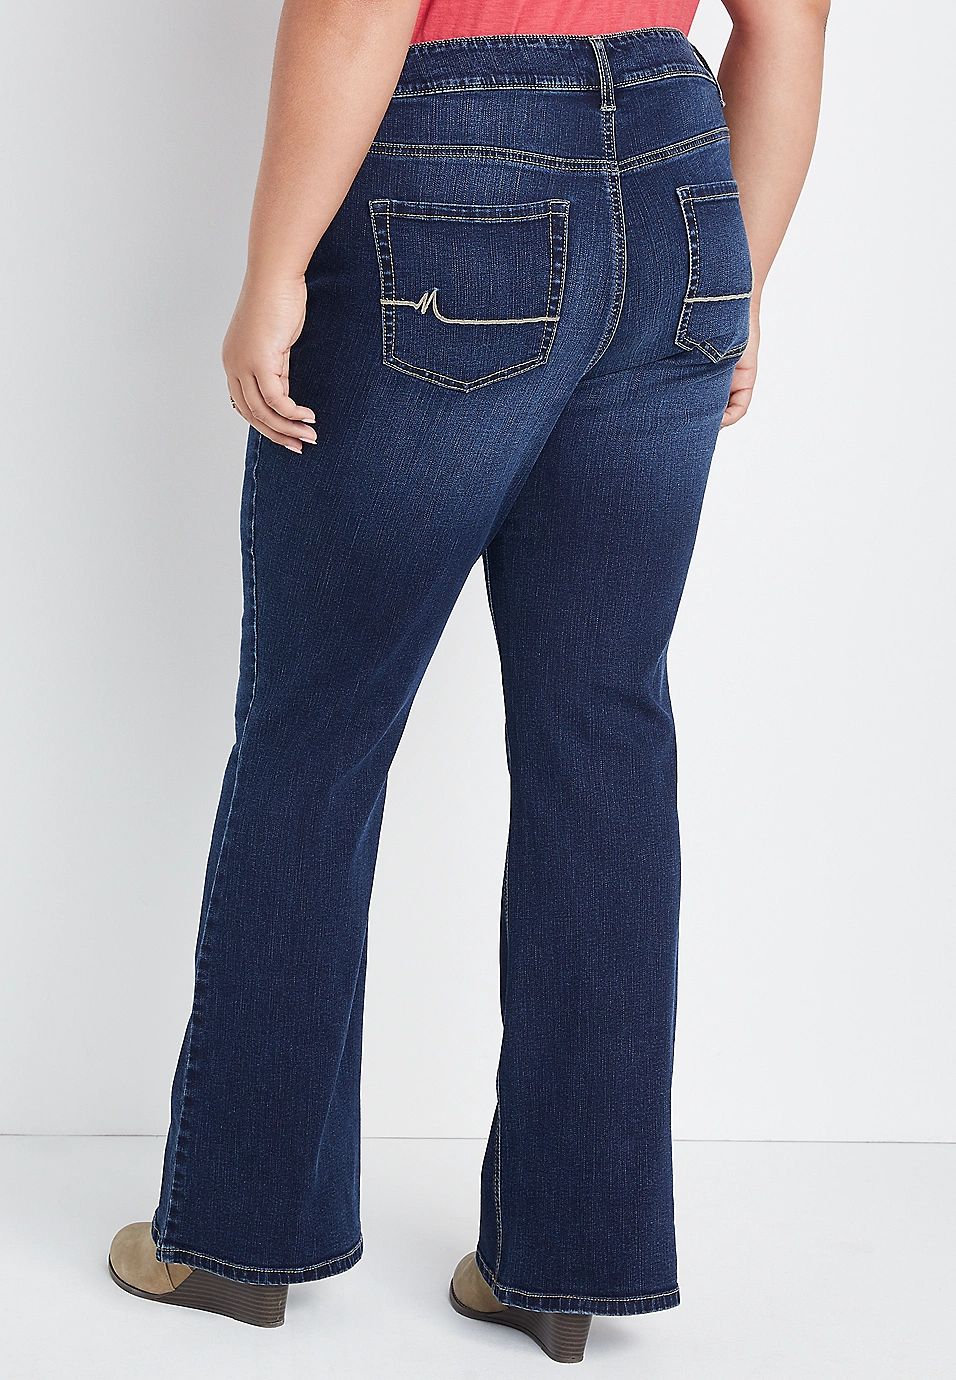 Plus Size m jeans by maurices™ Classic Flare Mid Rise Jean | Maurices